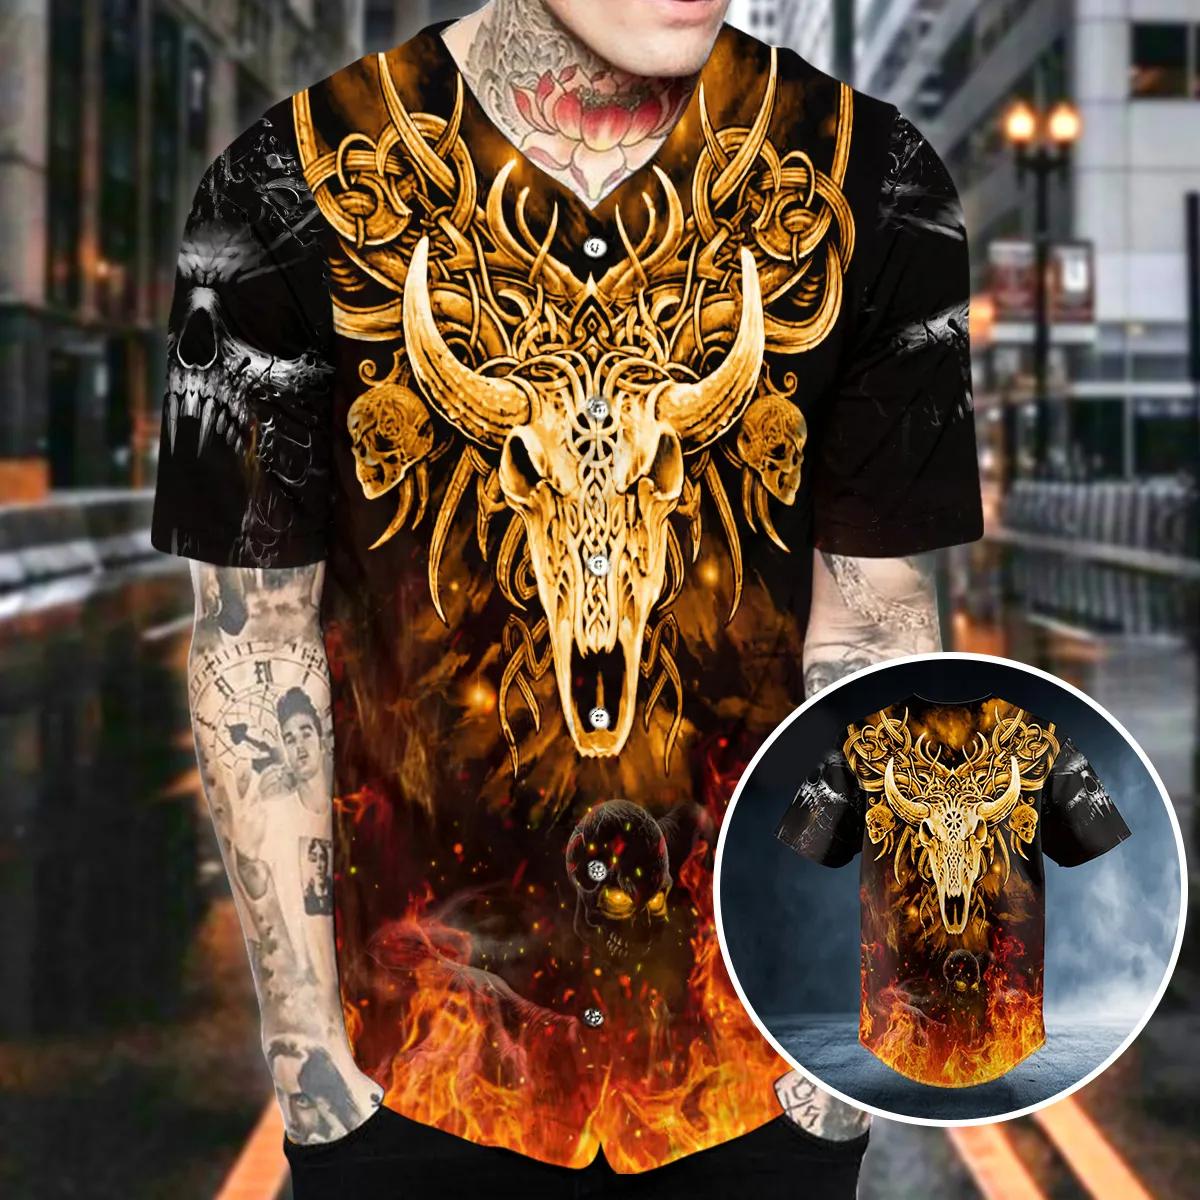 Buy Jersey Monster Online Shopping at